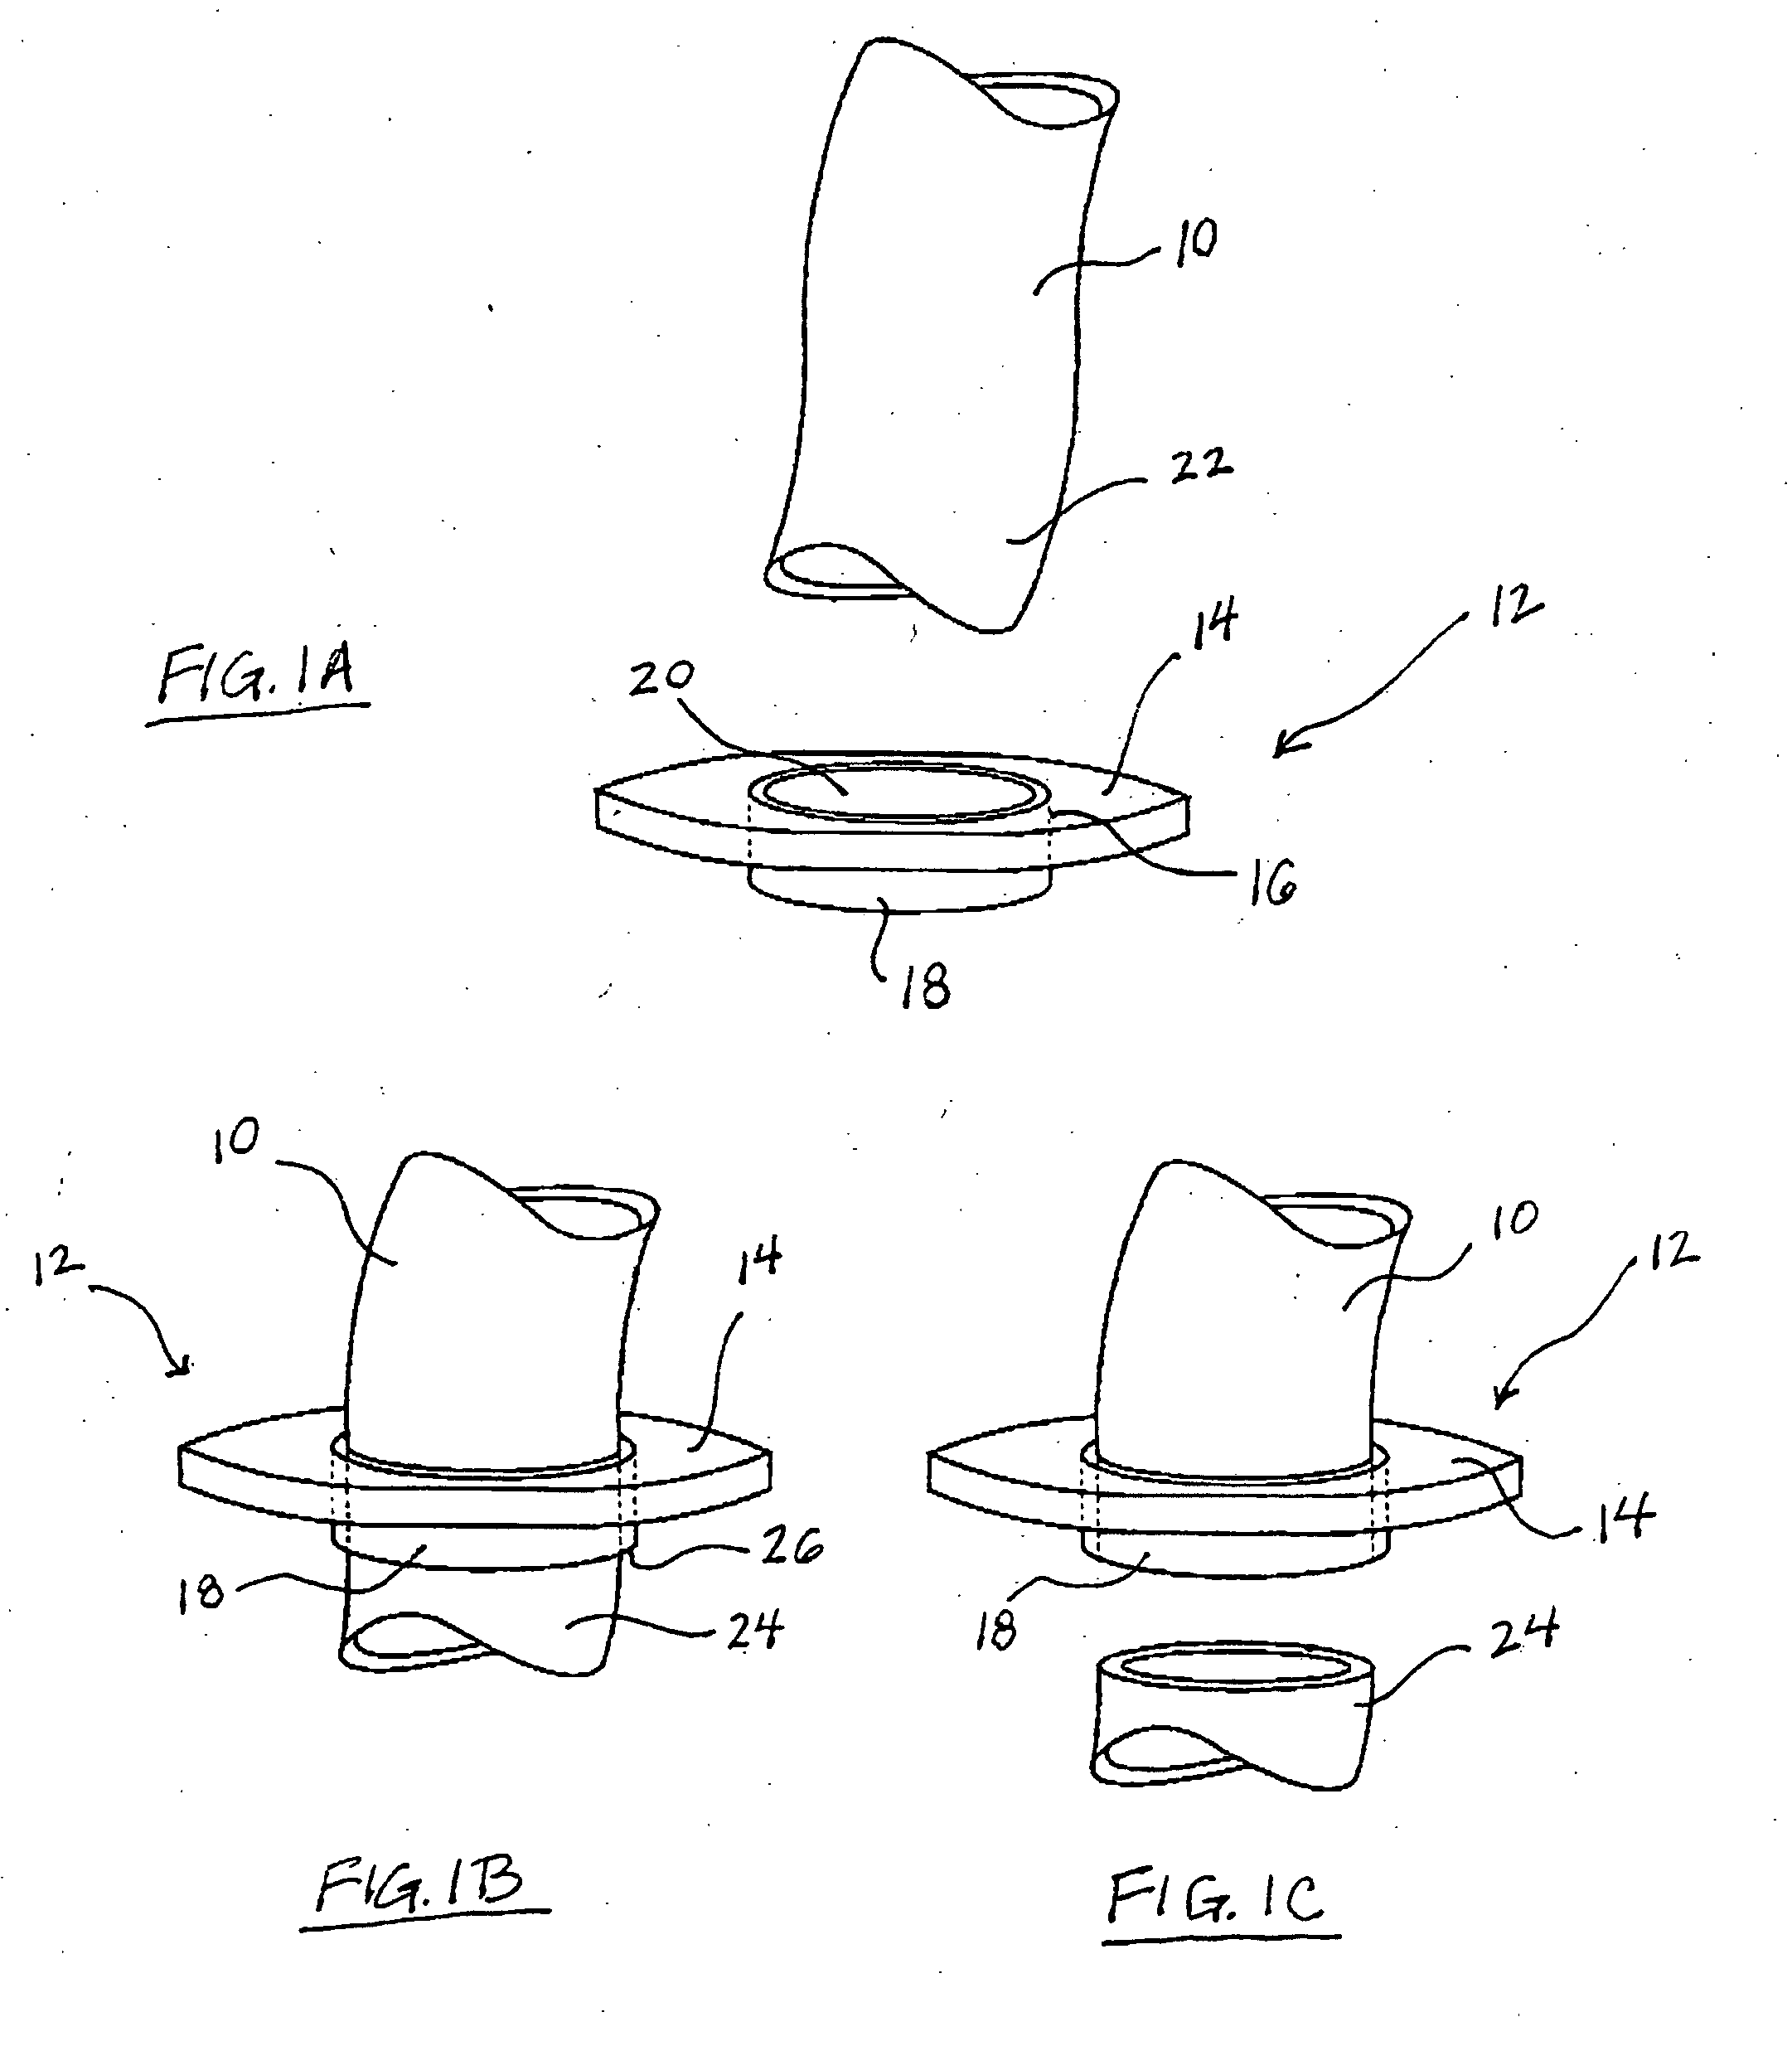 Components, systems, and methods for forming anastomoses using magnetism or other coupling means